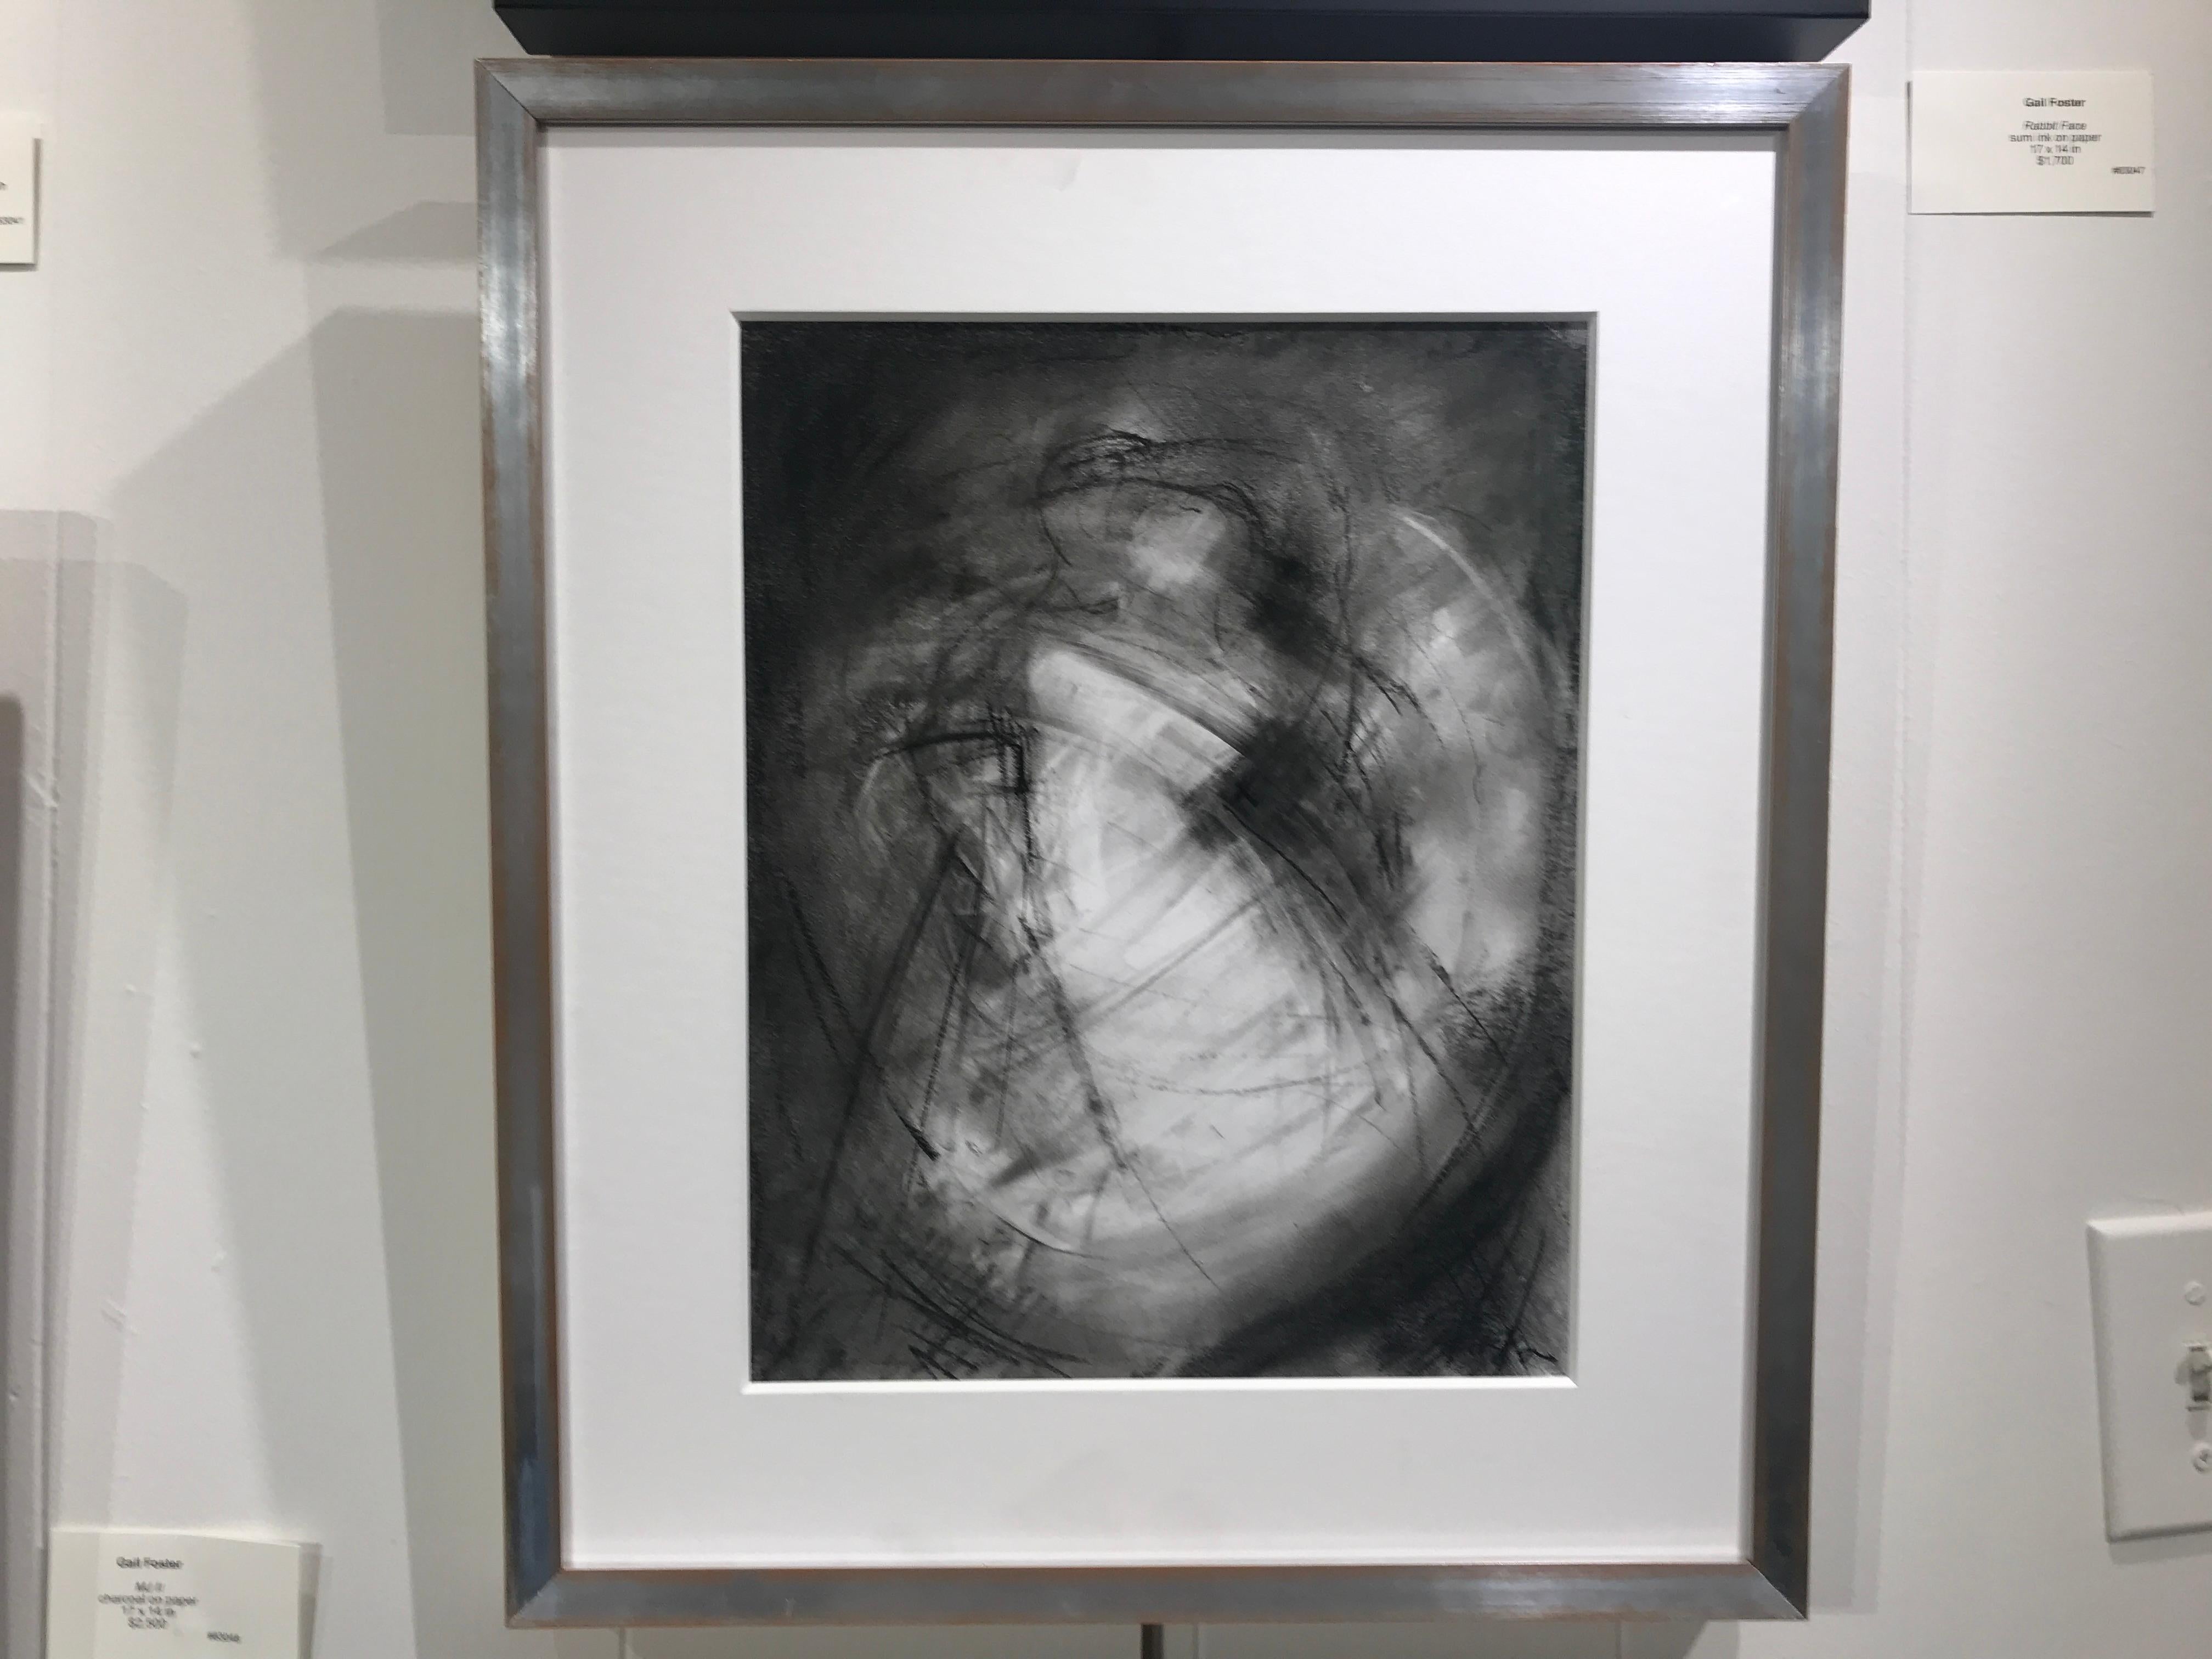 Currents III by Gail Foster 2018 Petite Framed Charcoal on Paper Figurative 1